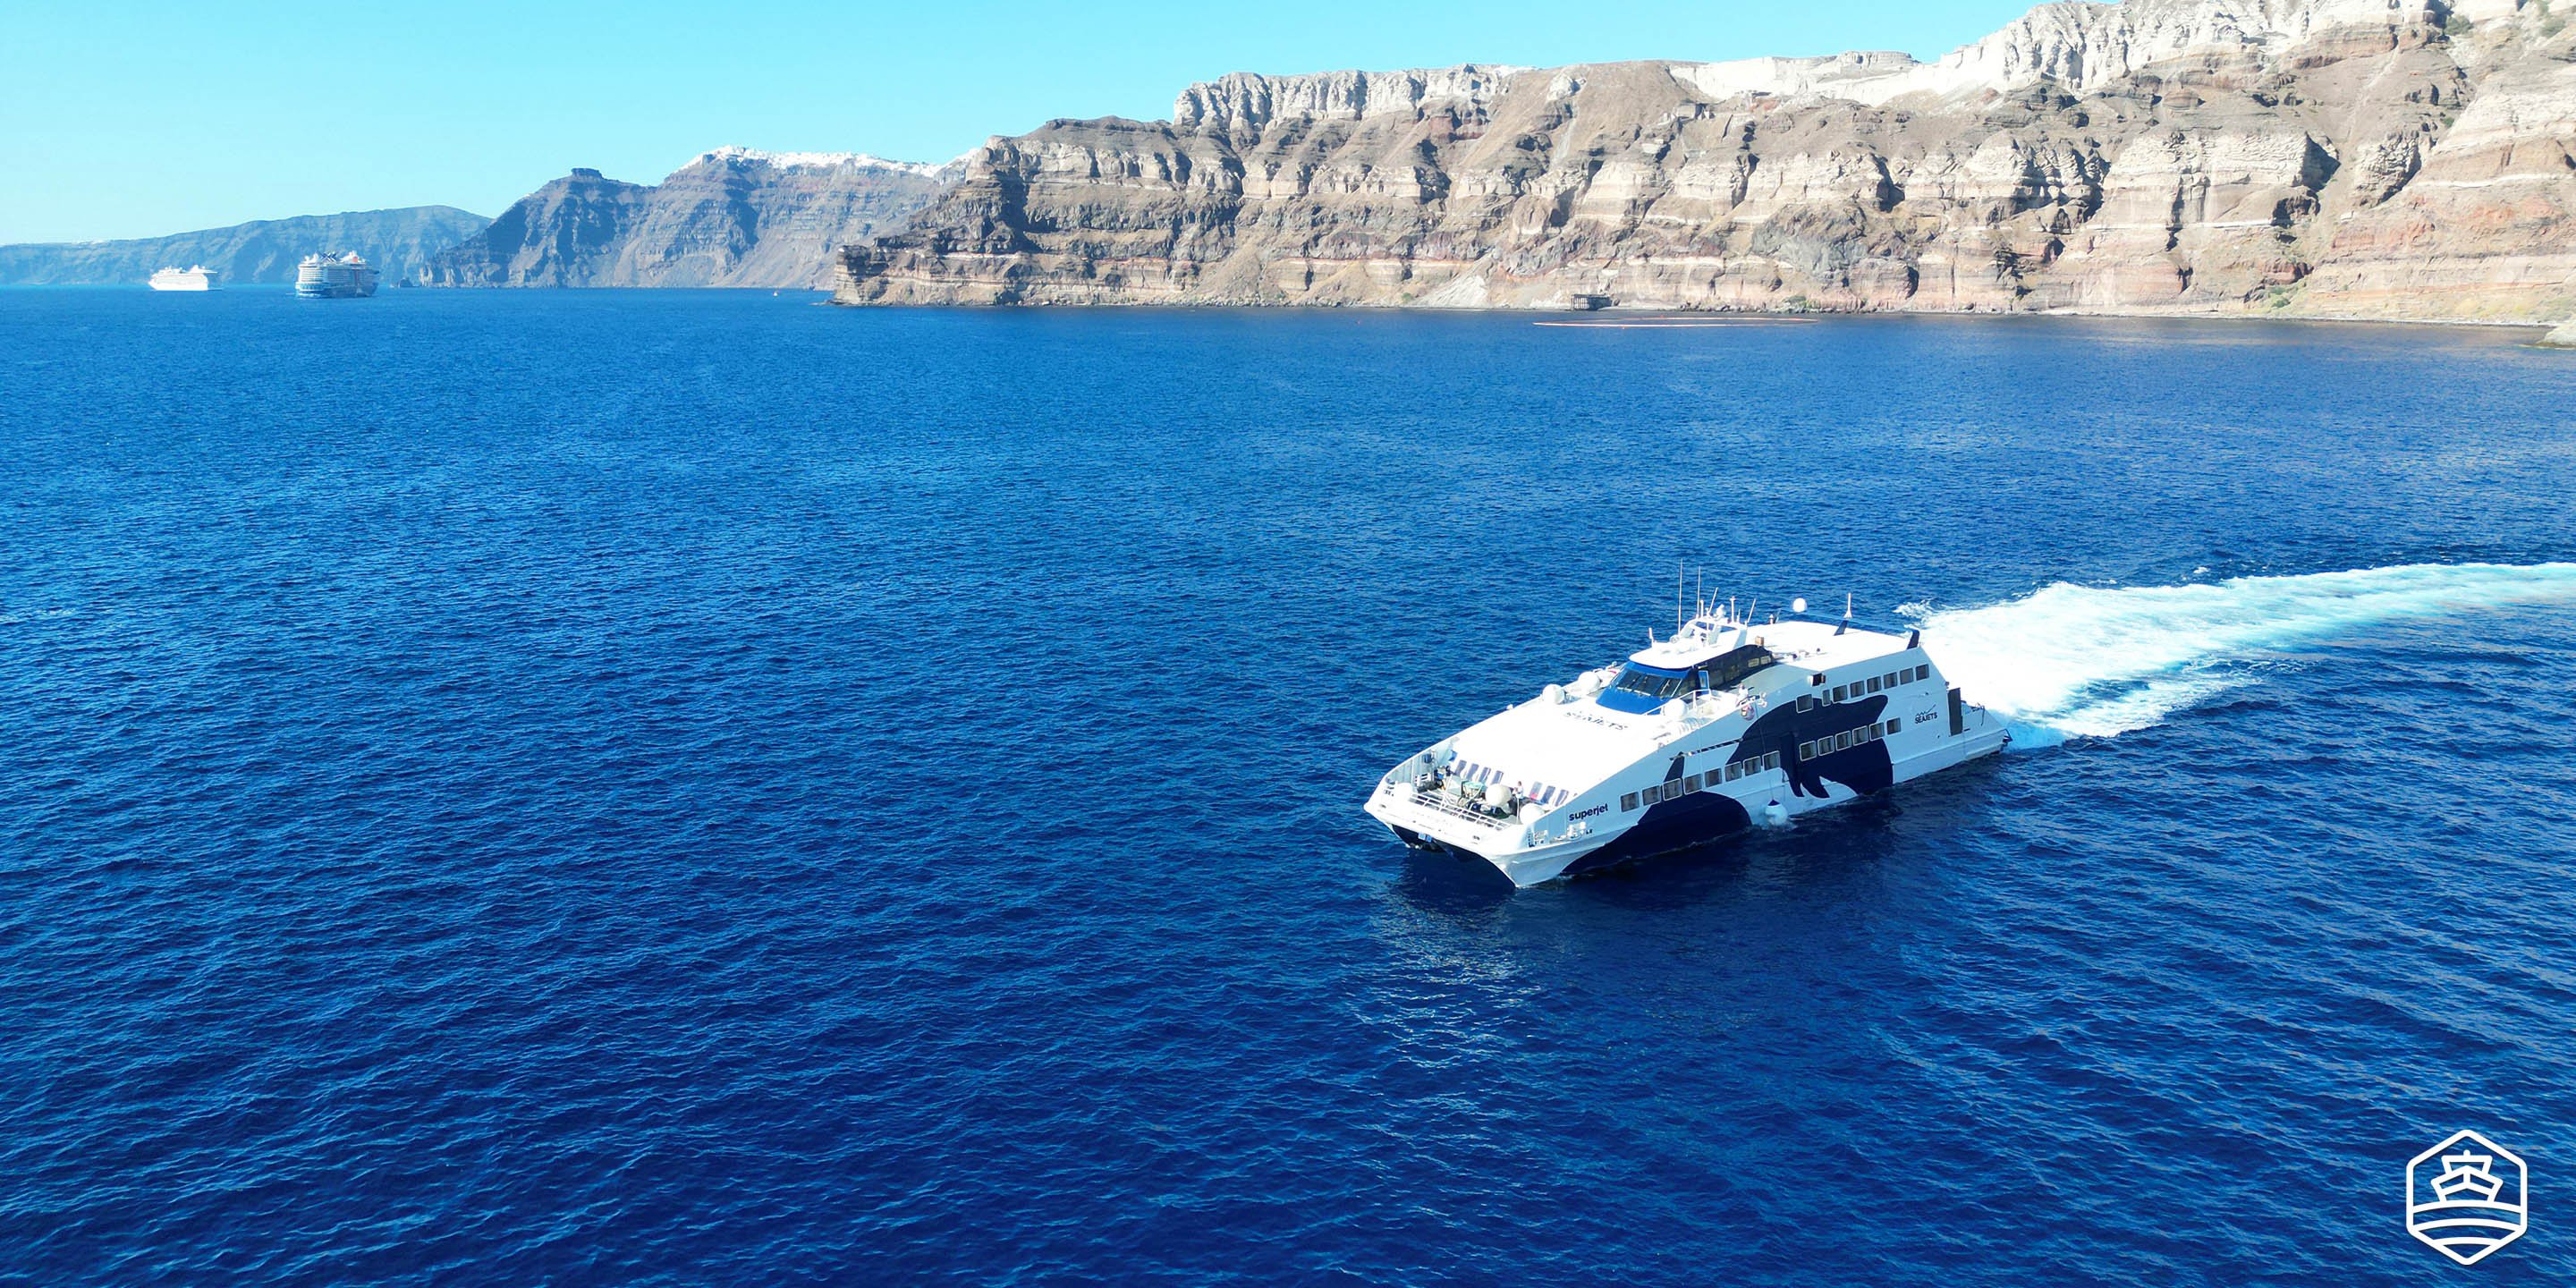 The high-speed ferry Super Jet of Seajets leaving the port of Athinios in Santorini for Naxos